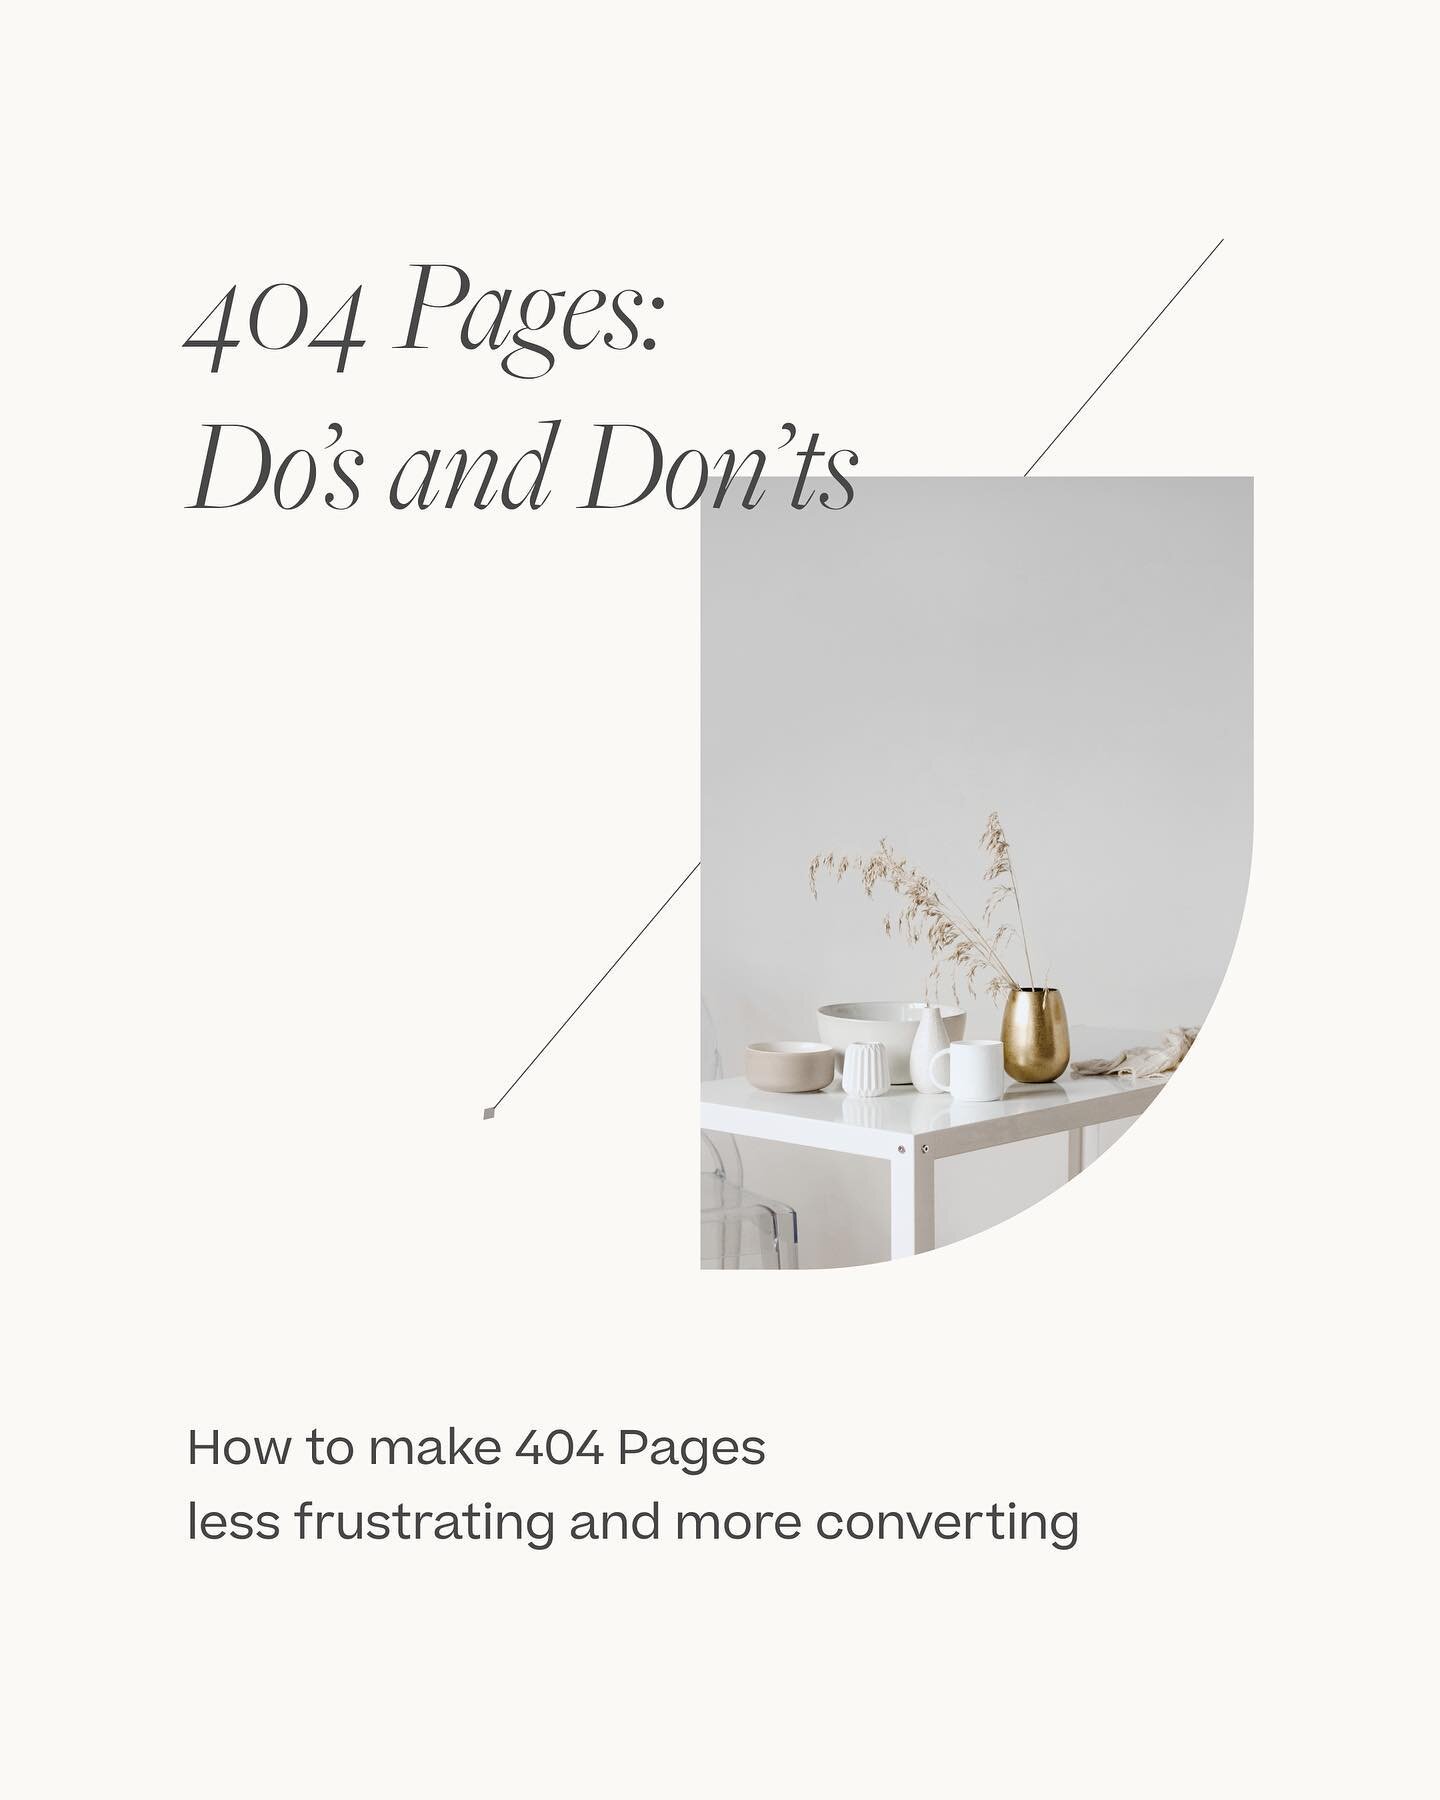 Oh no, it&rsquo;s a 404 page! 😰 Aren&rsquo;t they the worst? Yes &hellip; and no.
It&rsquo;s true: Not-found pages cause headaches and frustration. But it doesn&rsquo;t have to be that way!

🤔 First things first, what is a 404 page? 
A 404 page is 